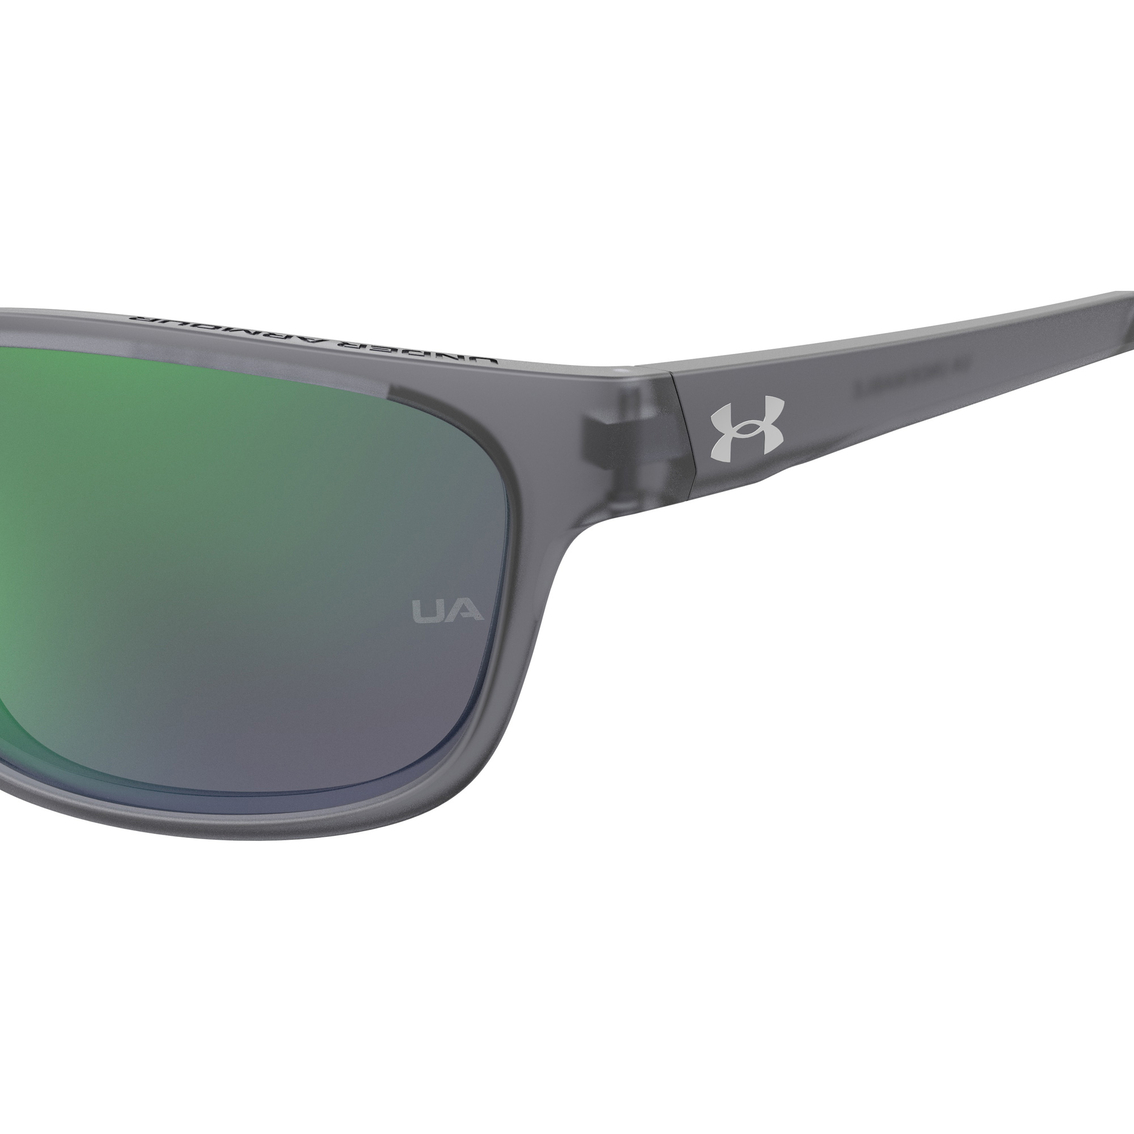 Under Armour Undeniable Sporty Wrap Sunglasses 063MZ9 - Image 4 of 5